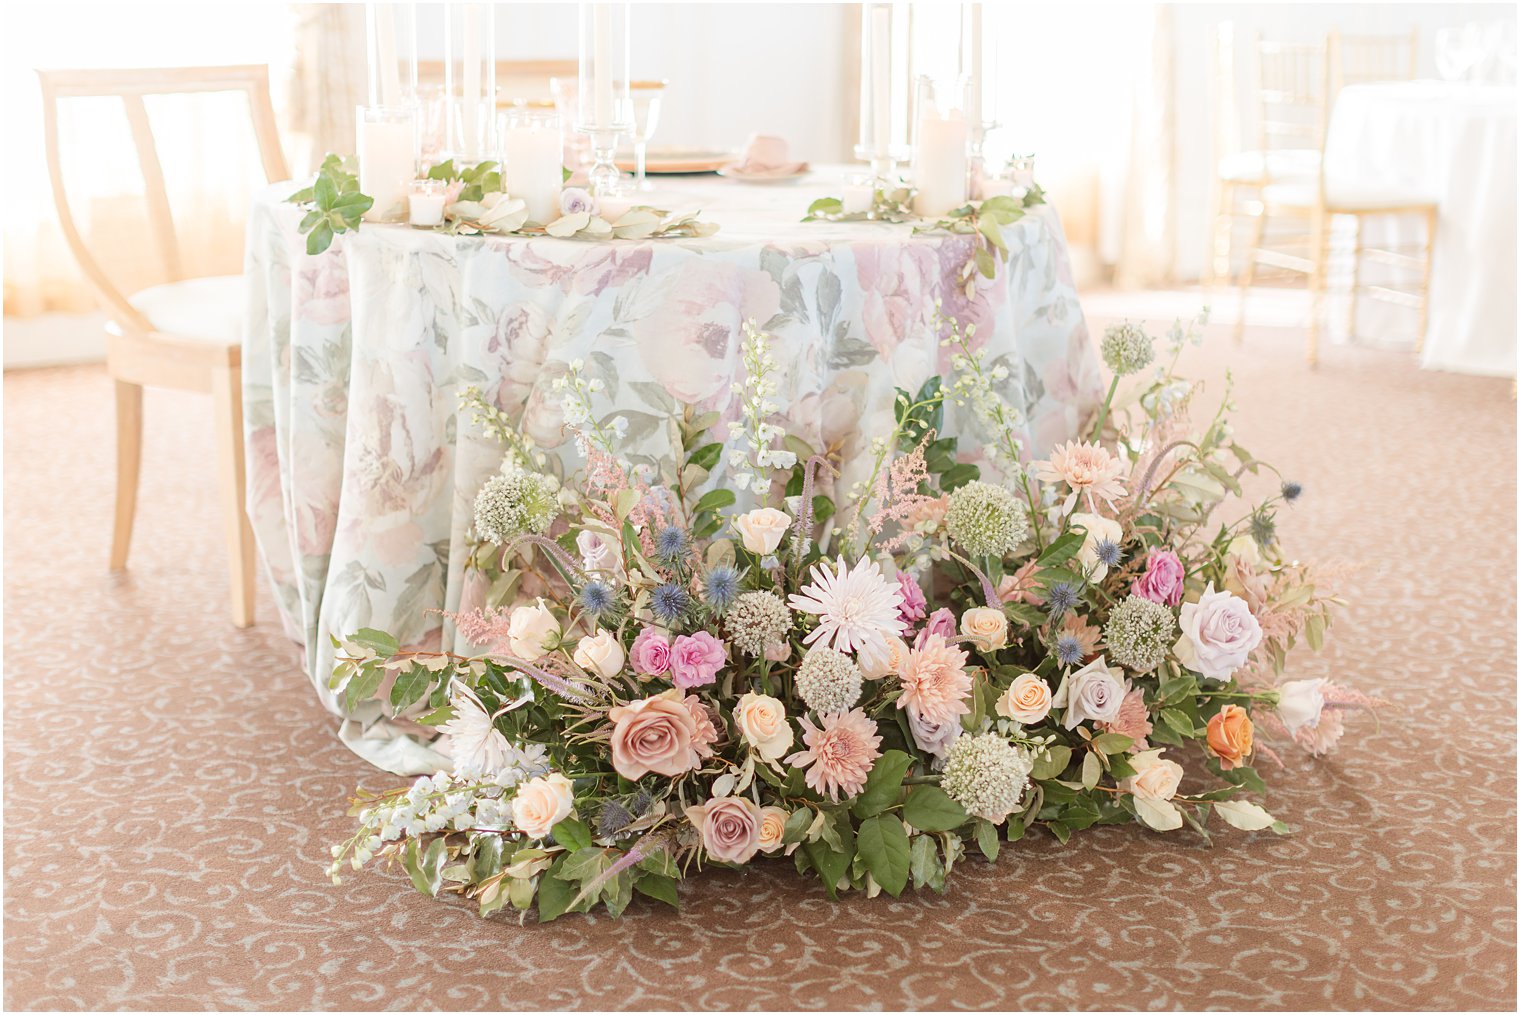 sweetheart table with blue and white table cloth with floral display in front